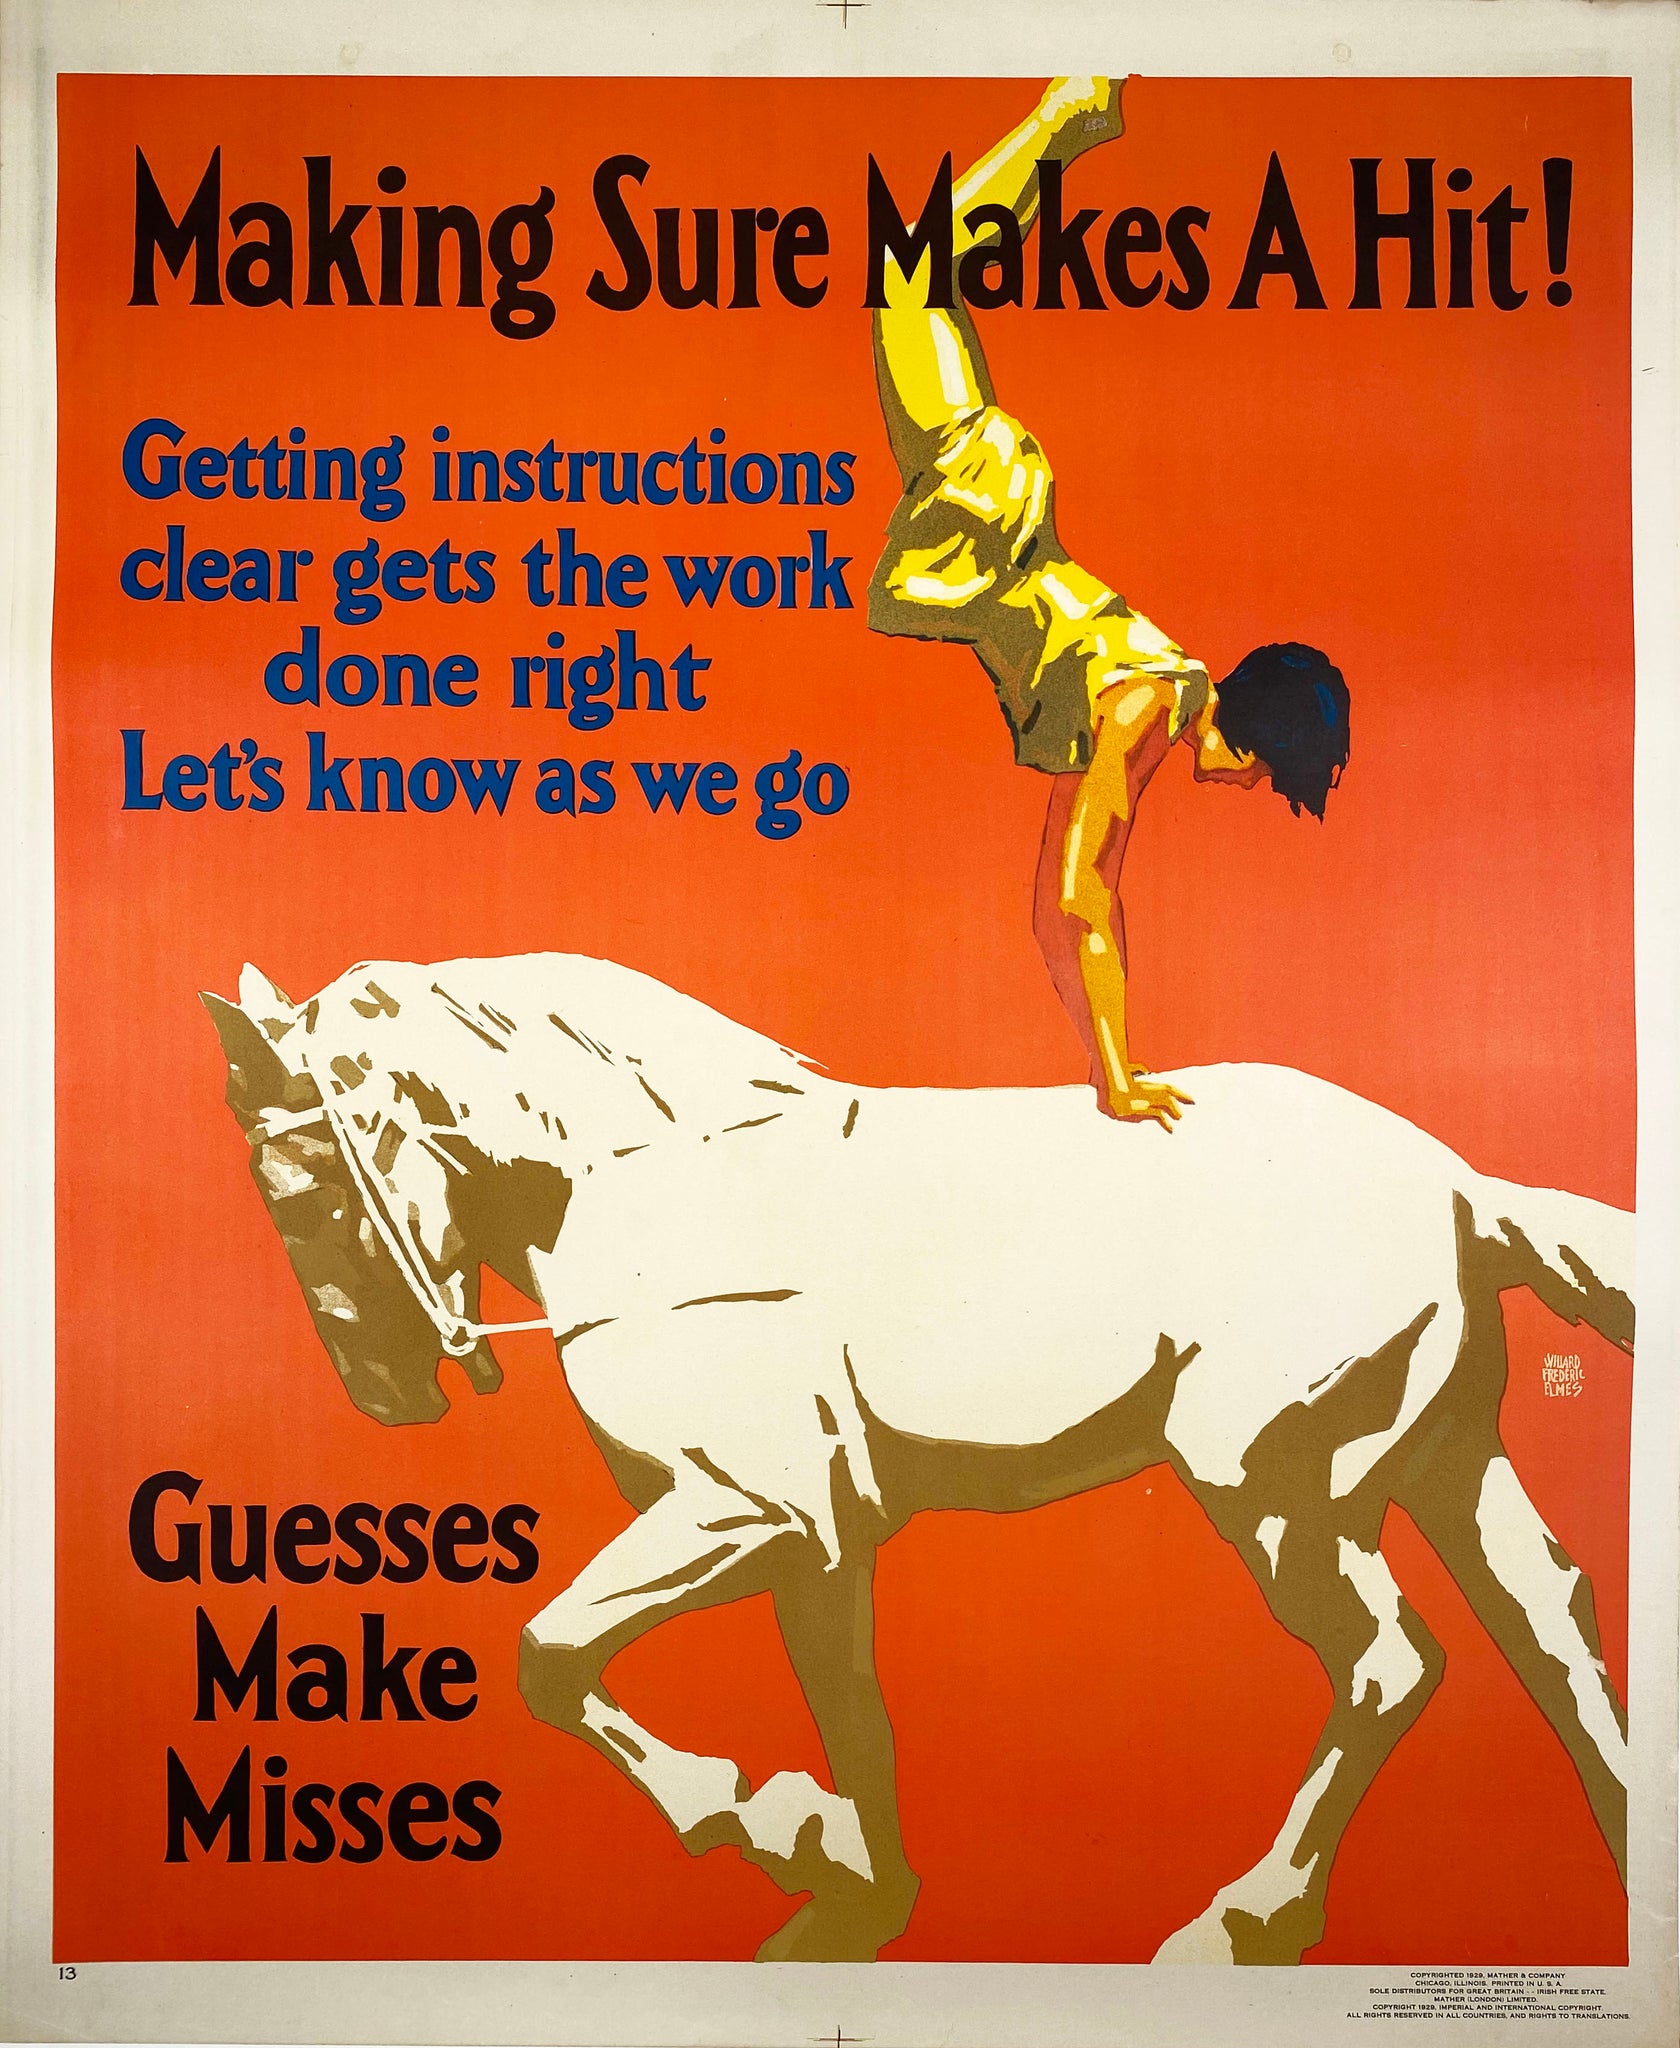 Mather & Co. Vintage Work Incentive poster 1929